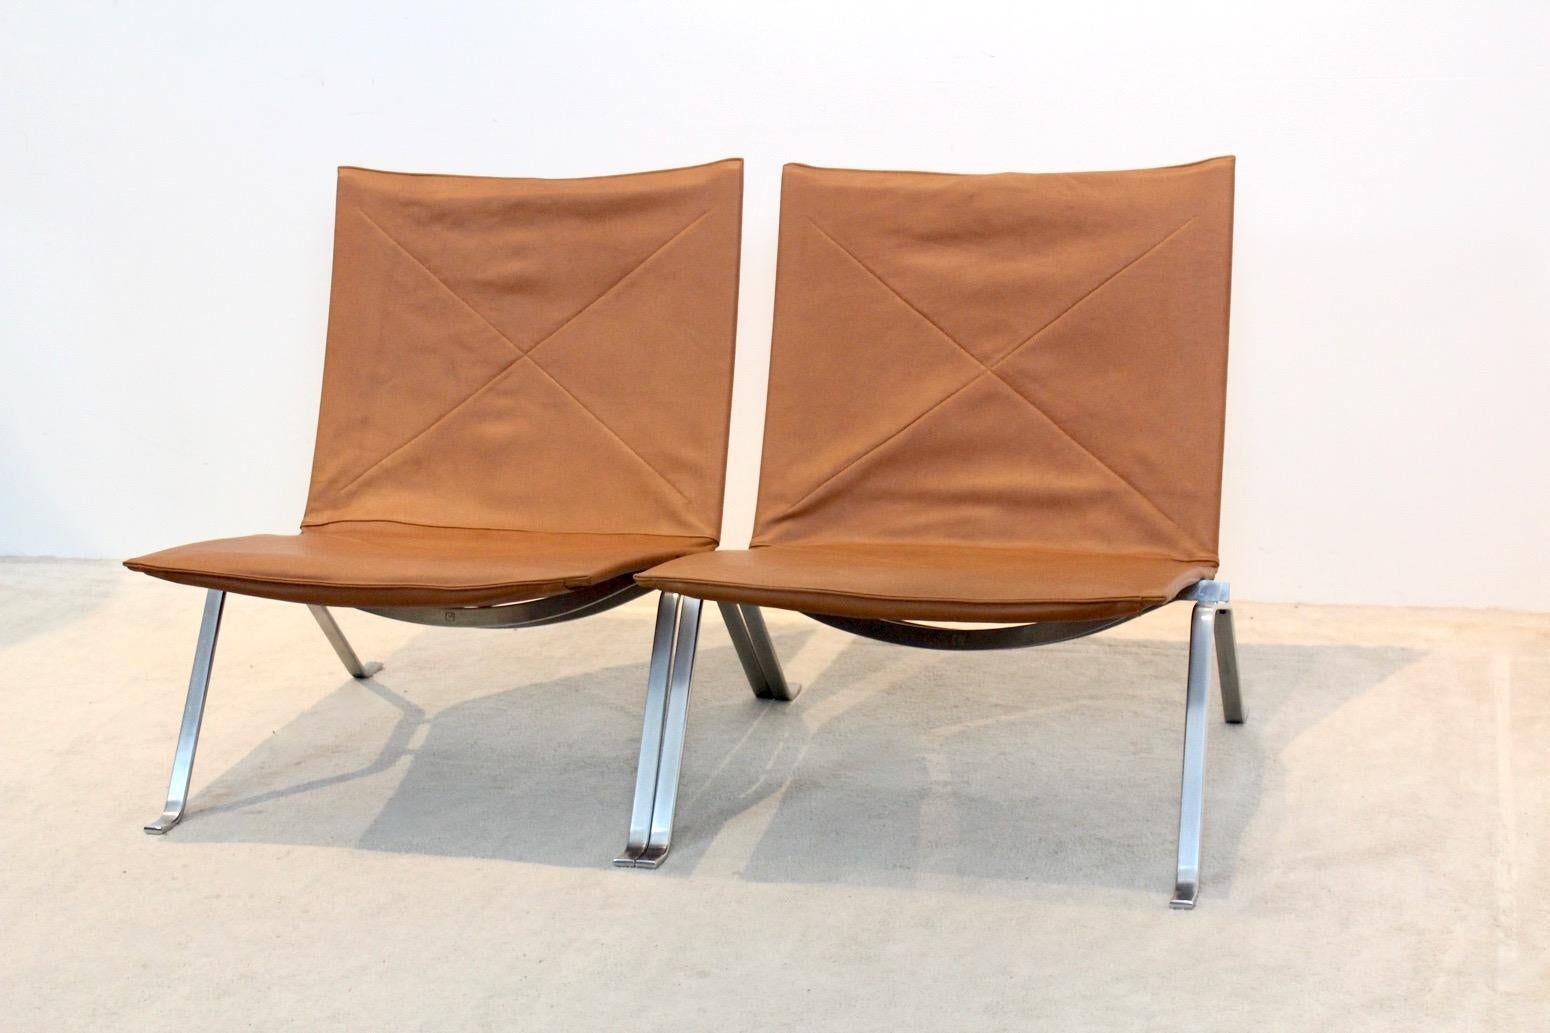 A very nice set of original PK 22 chairs designed by Poul Kjærholm for E. Kold Christensen, Denmark . This original old 1950s edition is professionally reupholstered with soft cognac leather. The solid brushed steel frame is stamped with the EKC